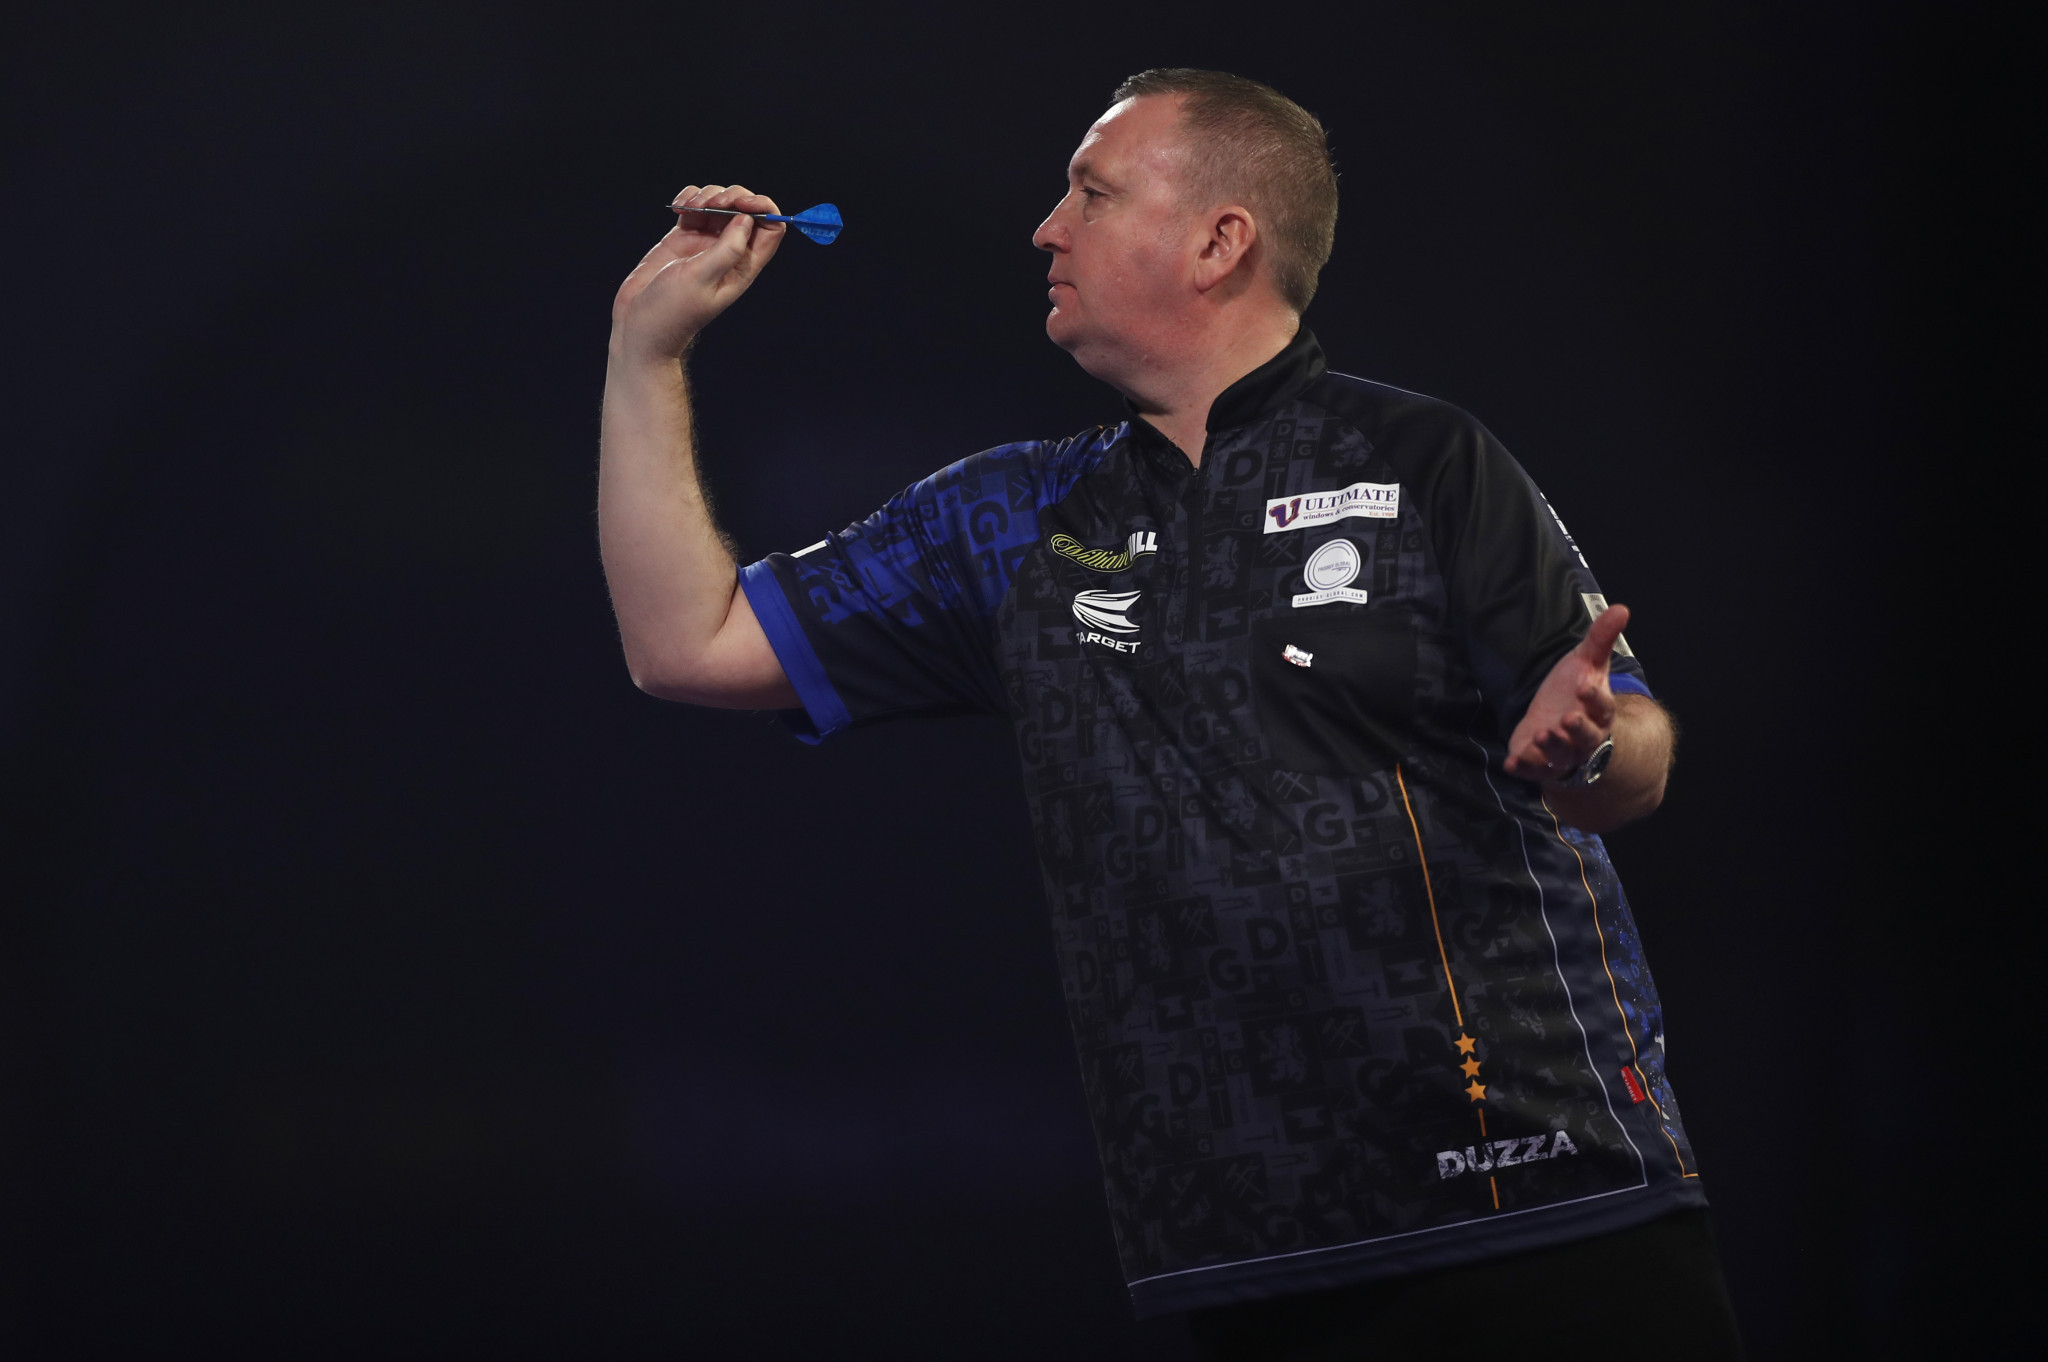 Premier League champion Glen Durrant was among the winners on day two of the PDC World Darts Championship ©Getty Images